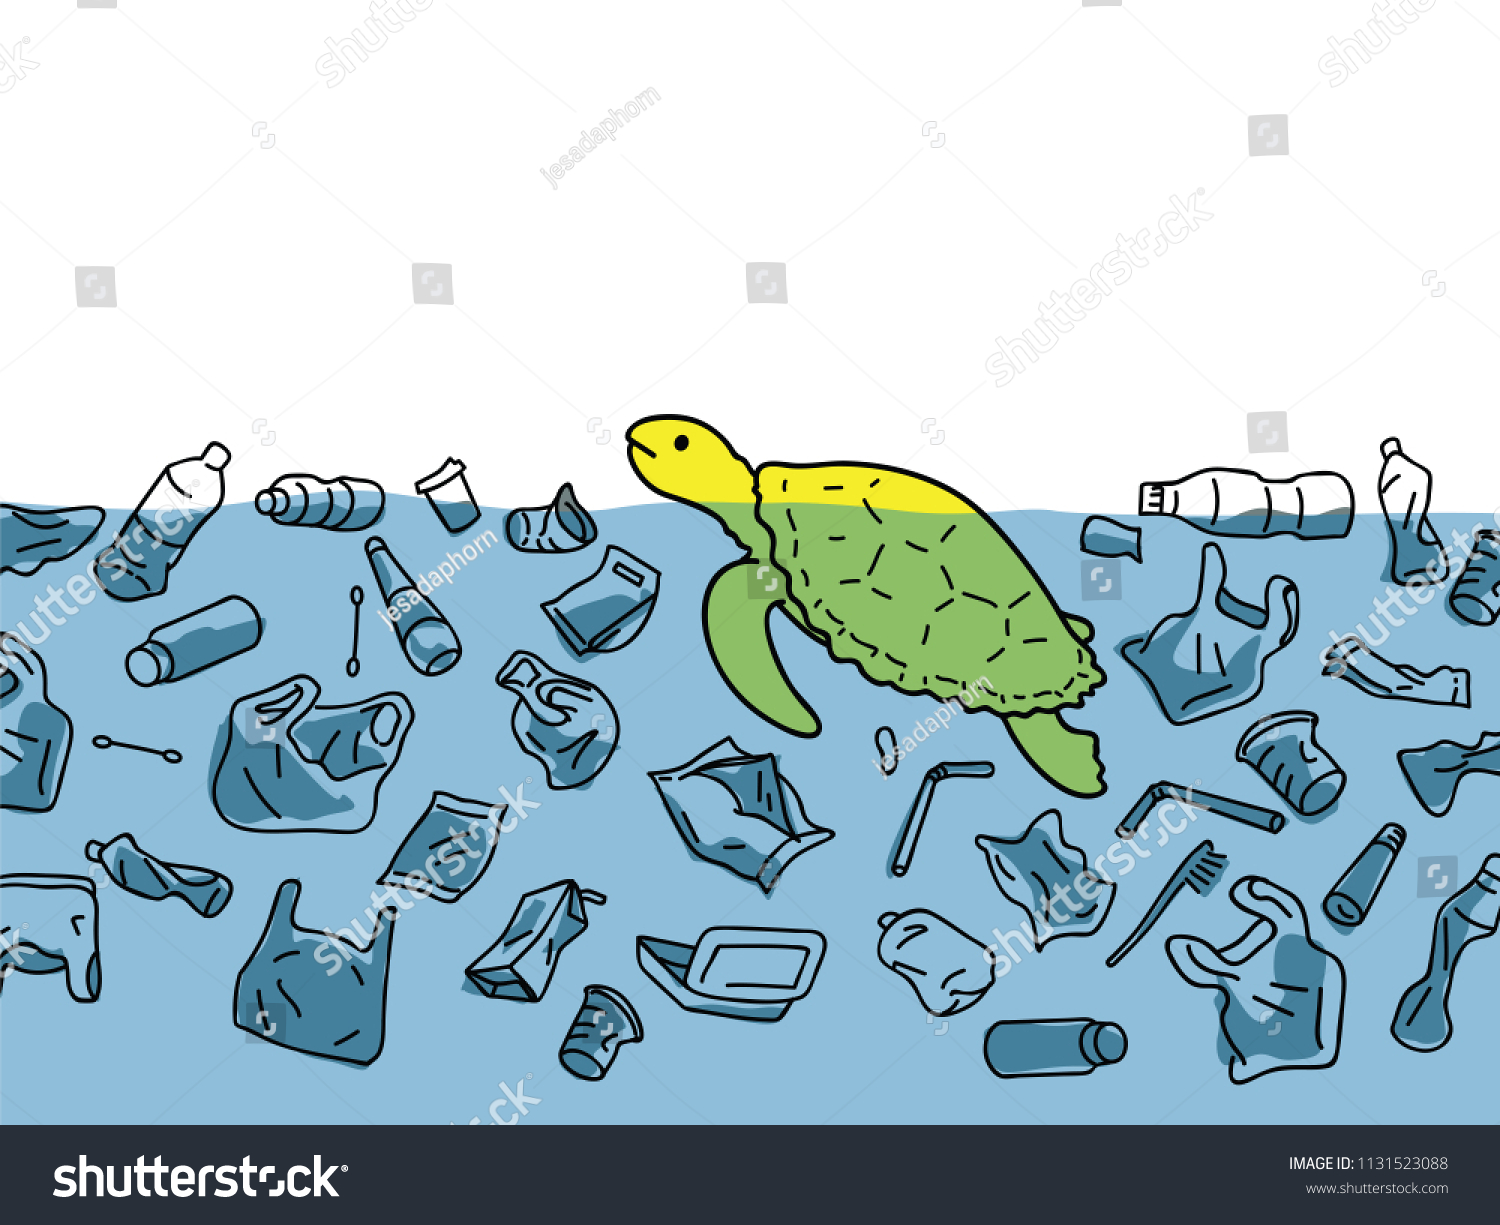 stock-vector-vector-illustration-of-sea-turtle-in-sea-water-surrounding-with-garbage-and-plastic-in-concept-of-1131523088